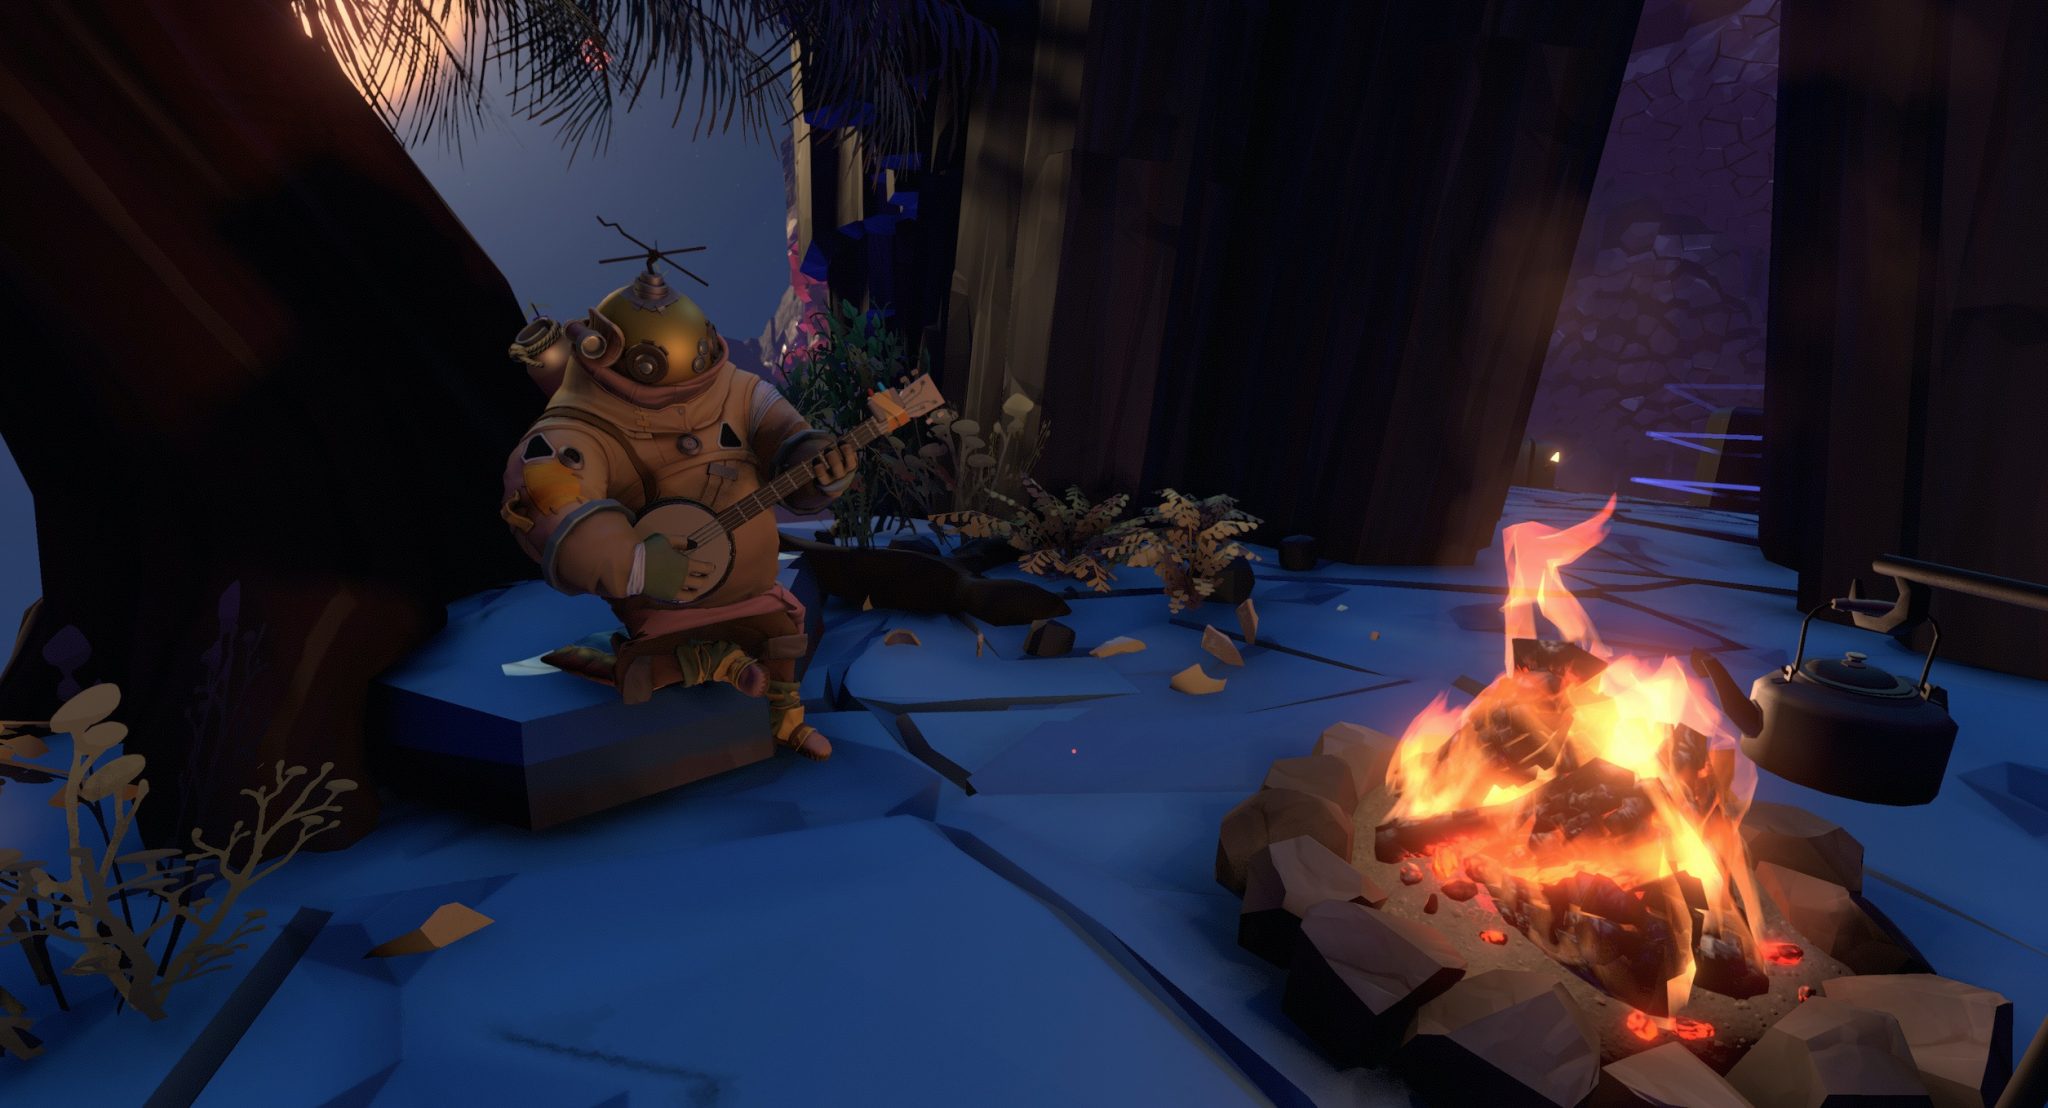 A spaceman plays banjo at a campfire. Expresses the mood of the game.